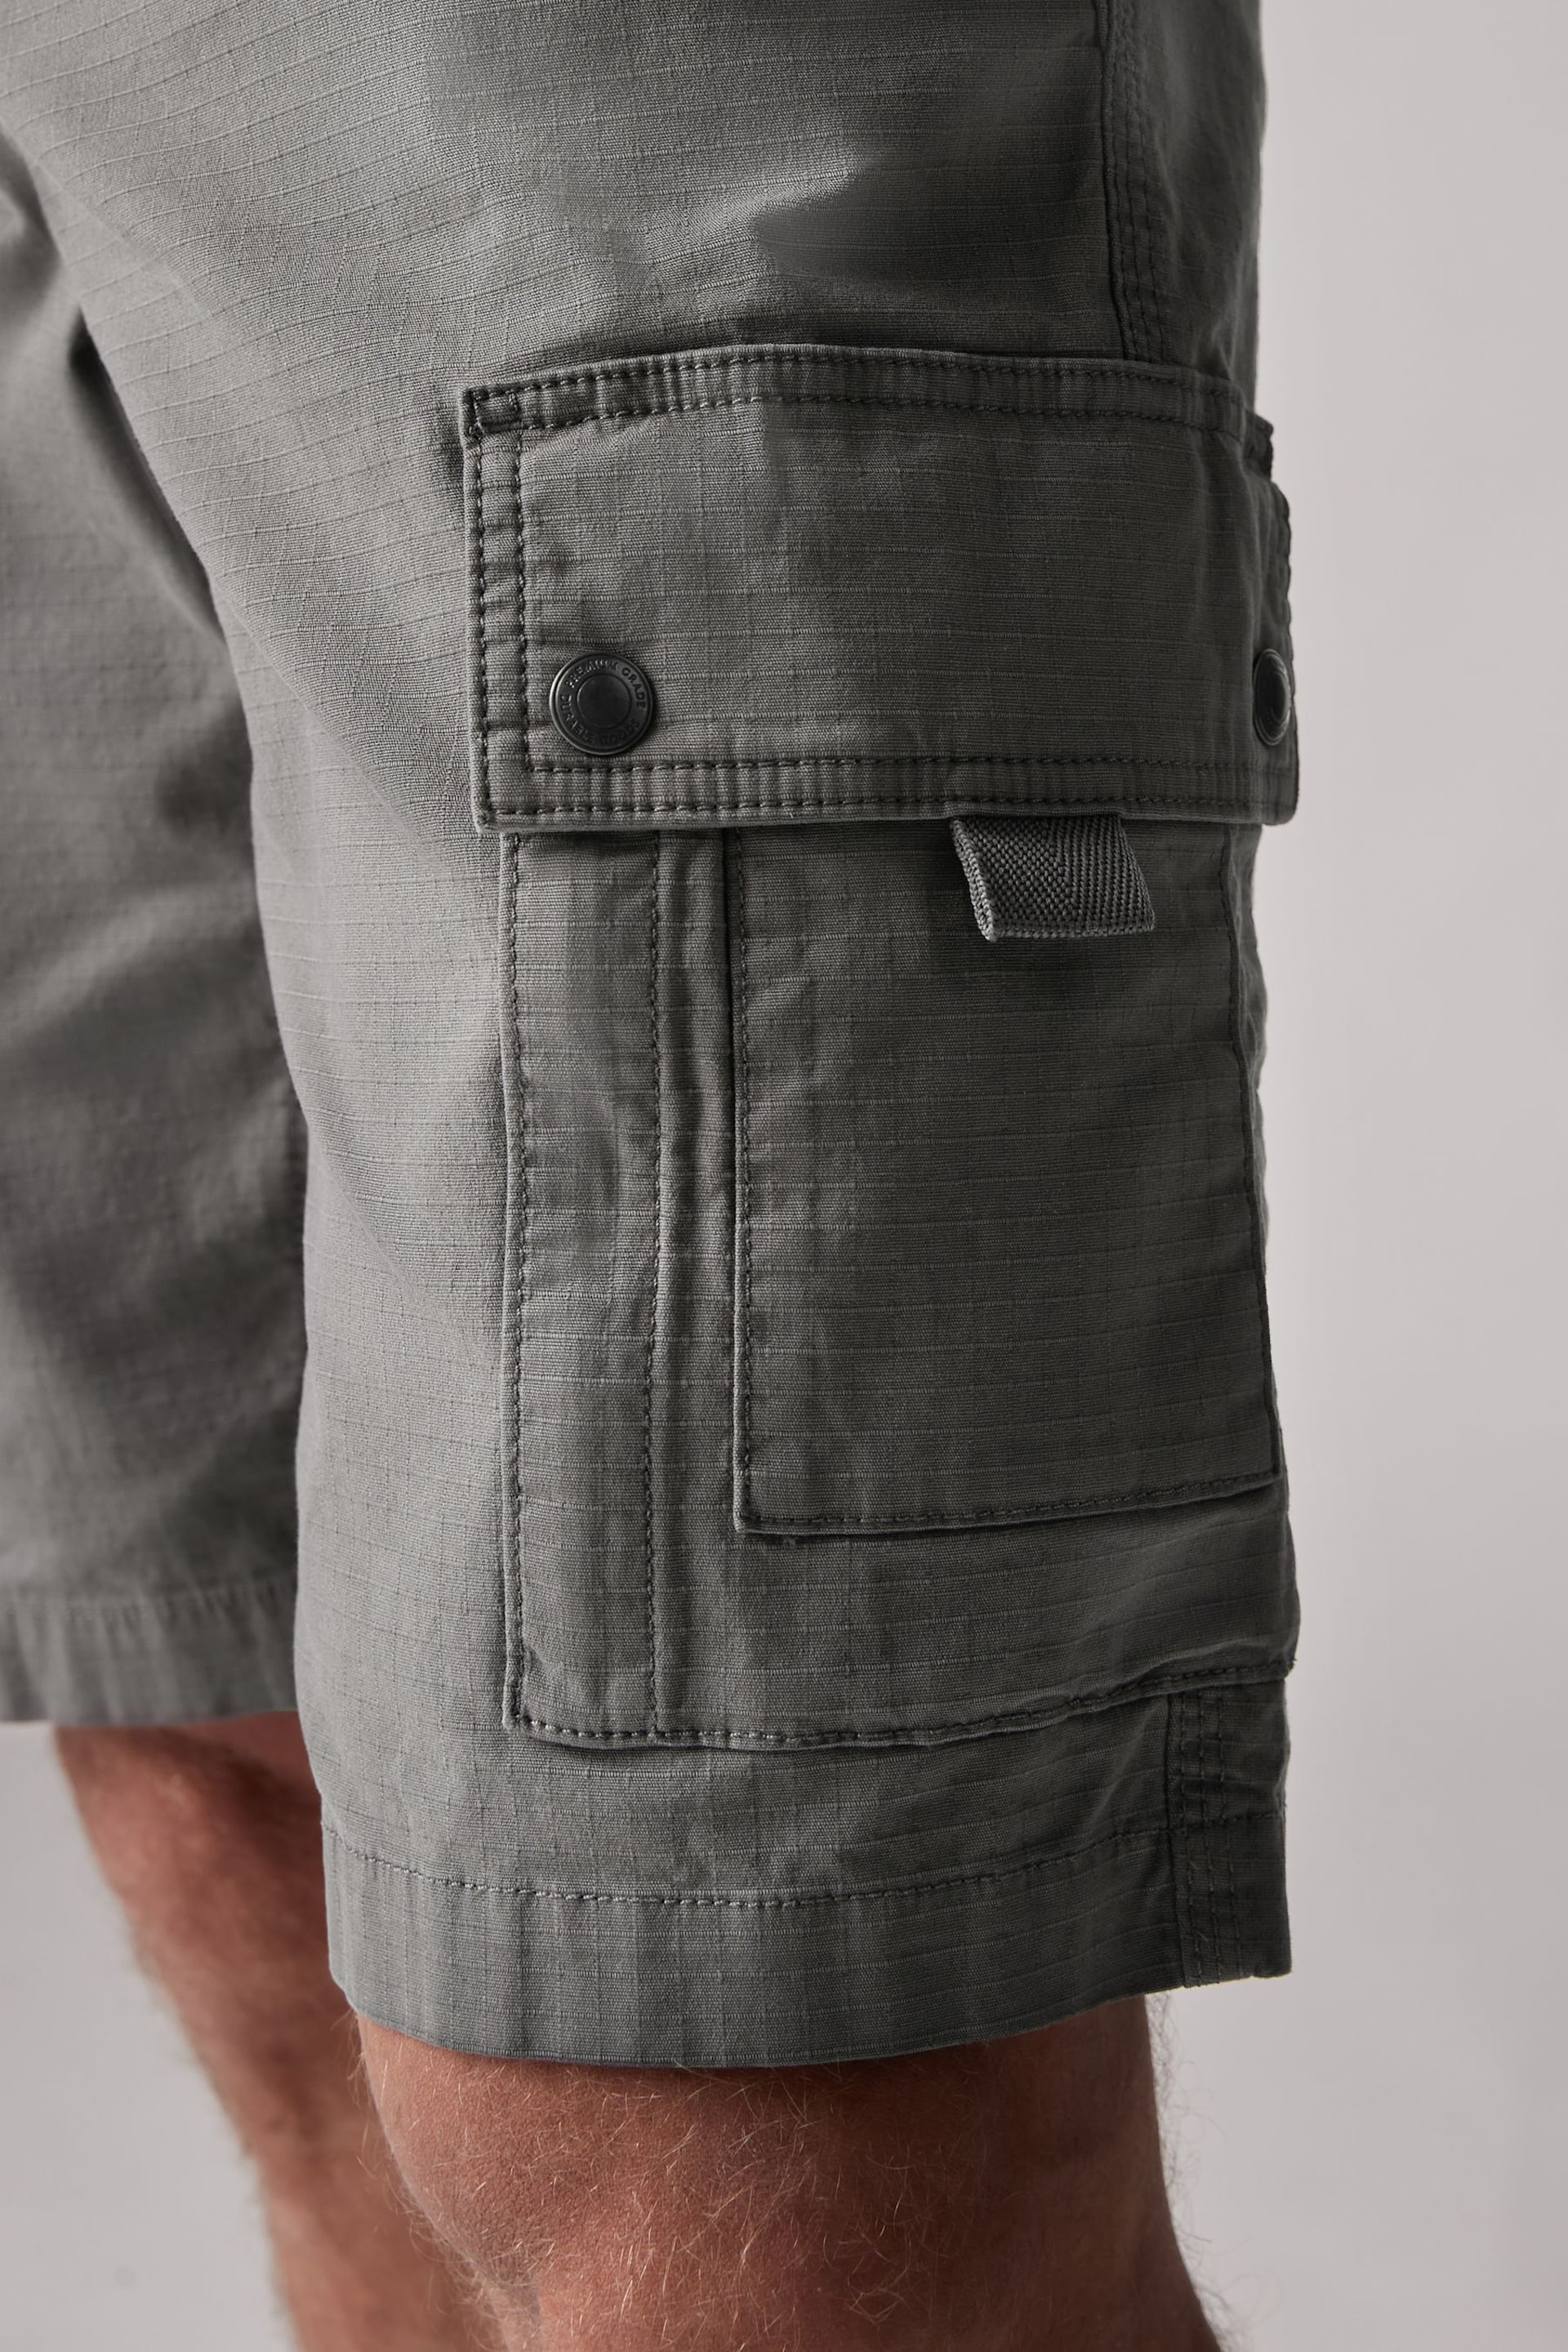 Charcoal Grey Belted Cargo Shorts - Image 5 of 12